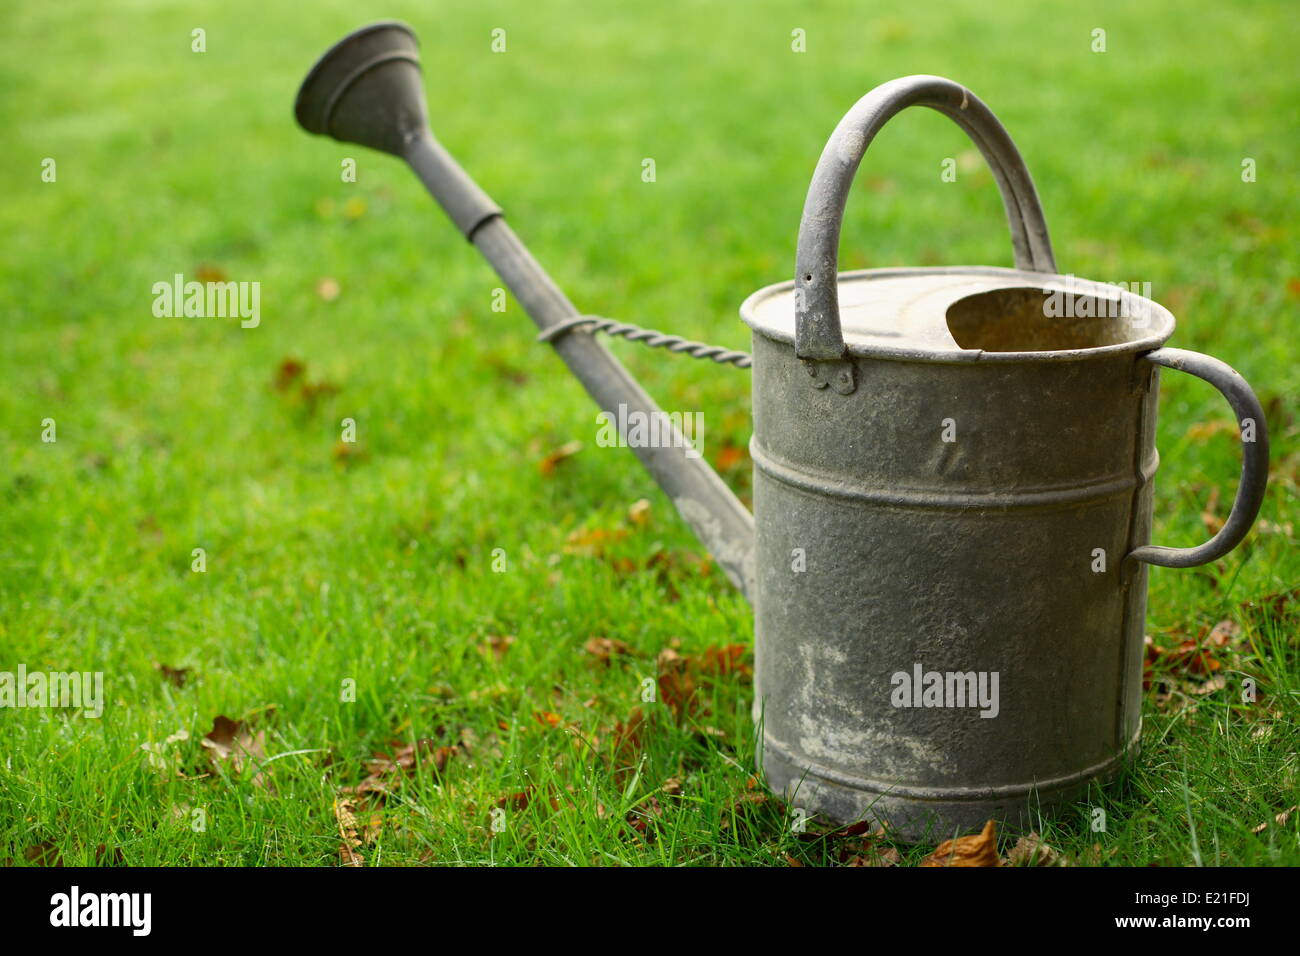 Watering can Stock Photo